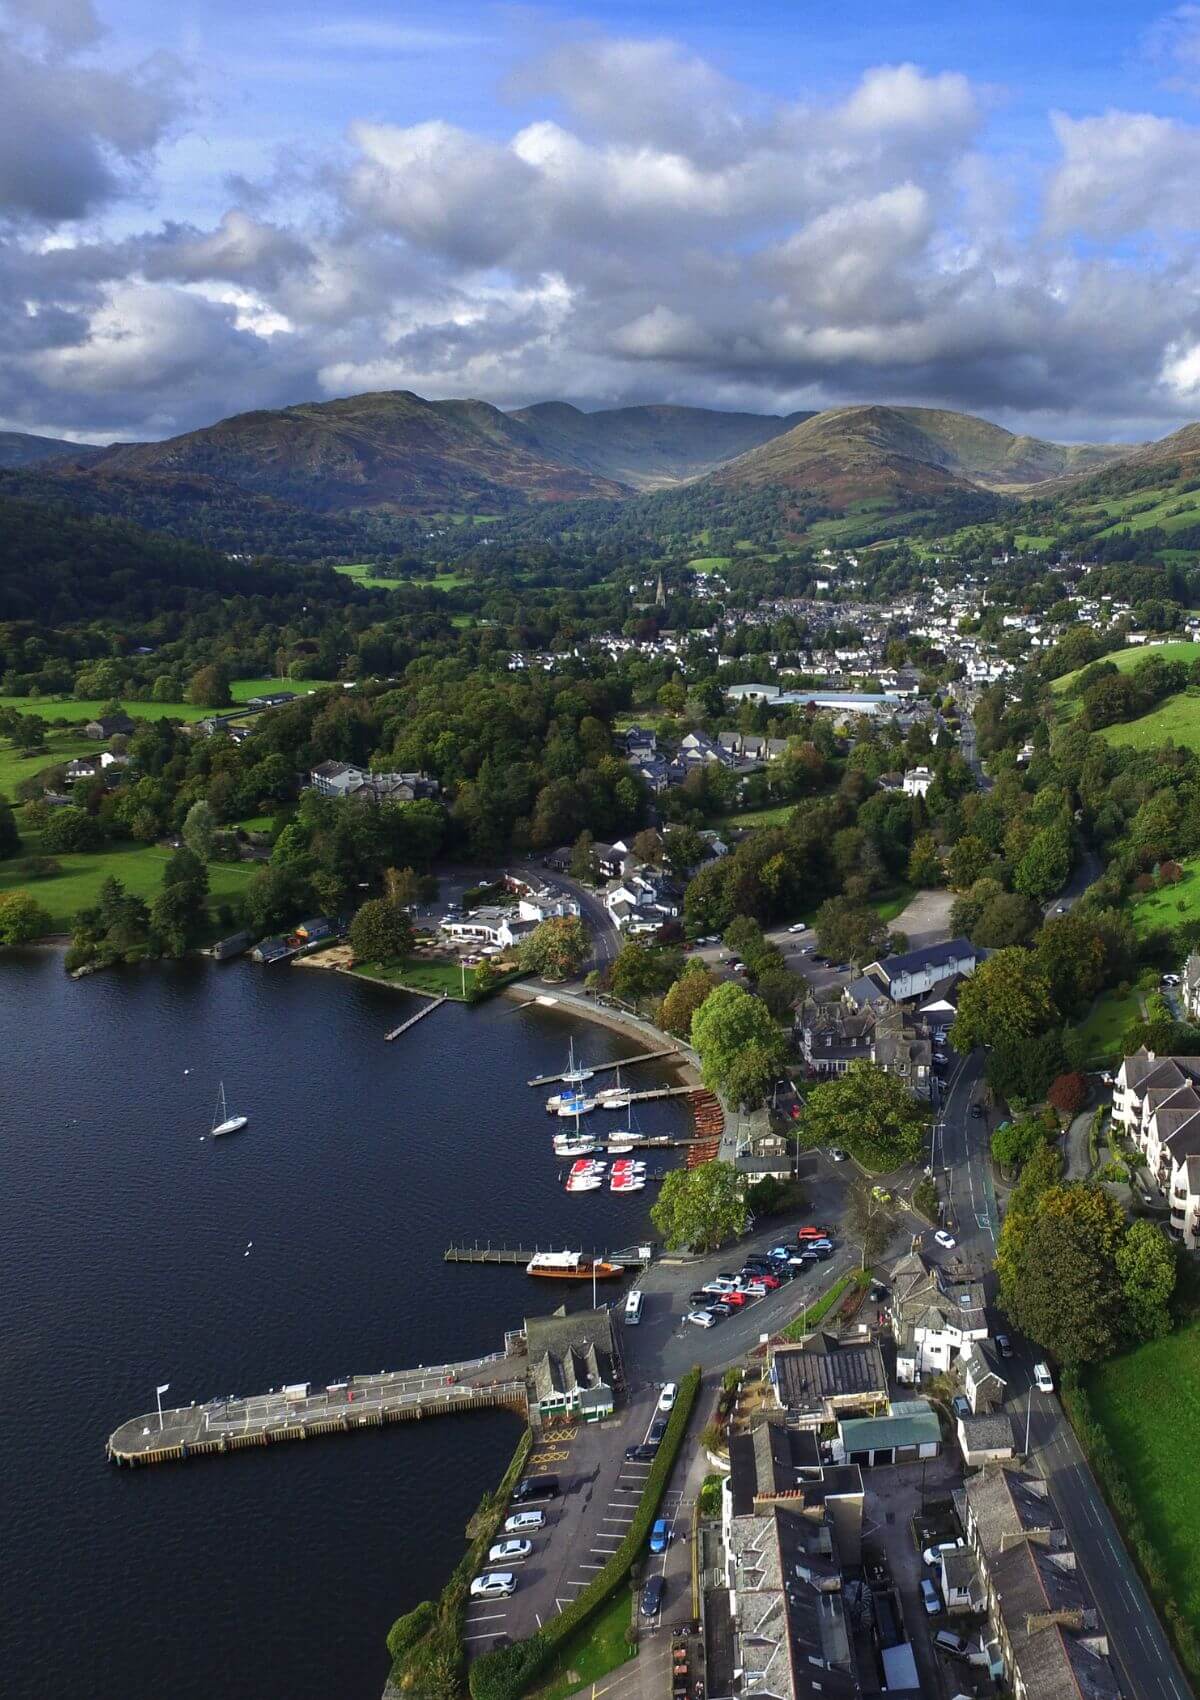 Ambleside in the Lake District